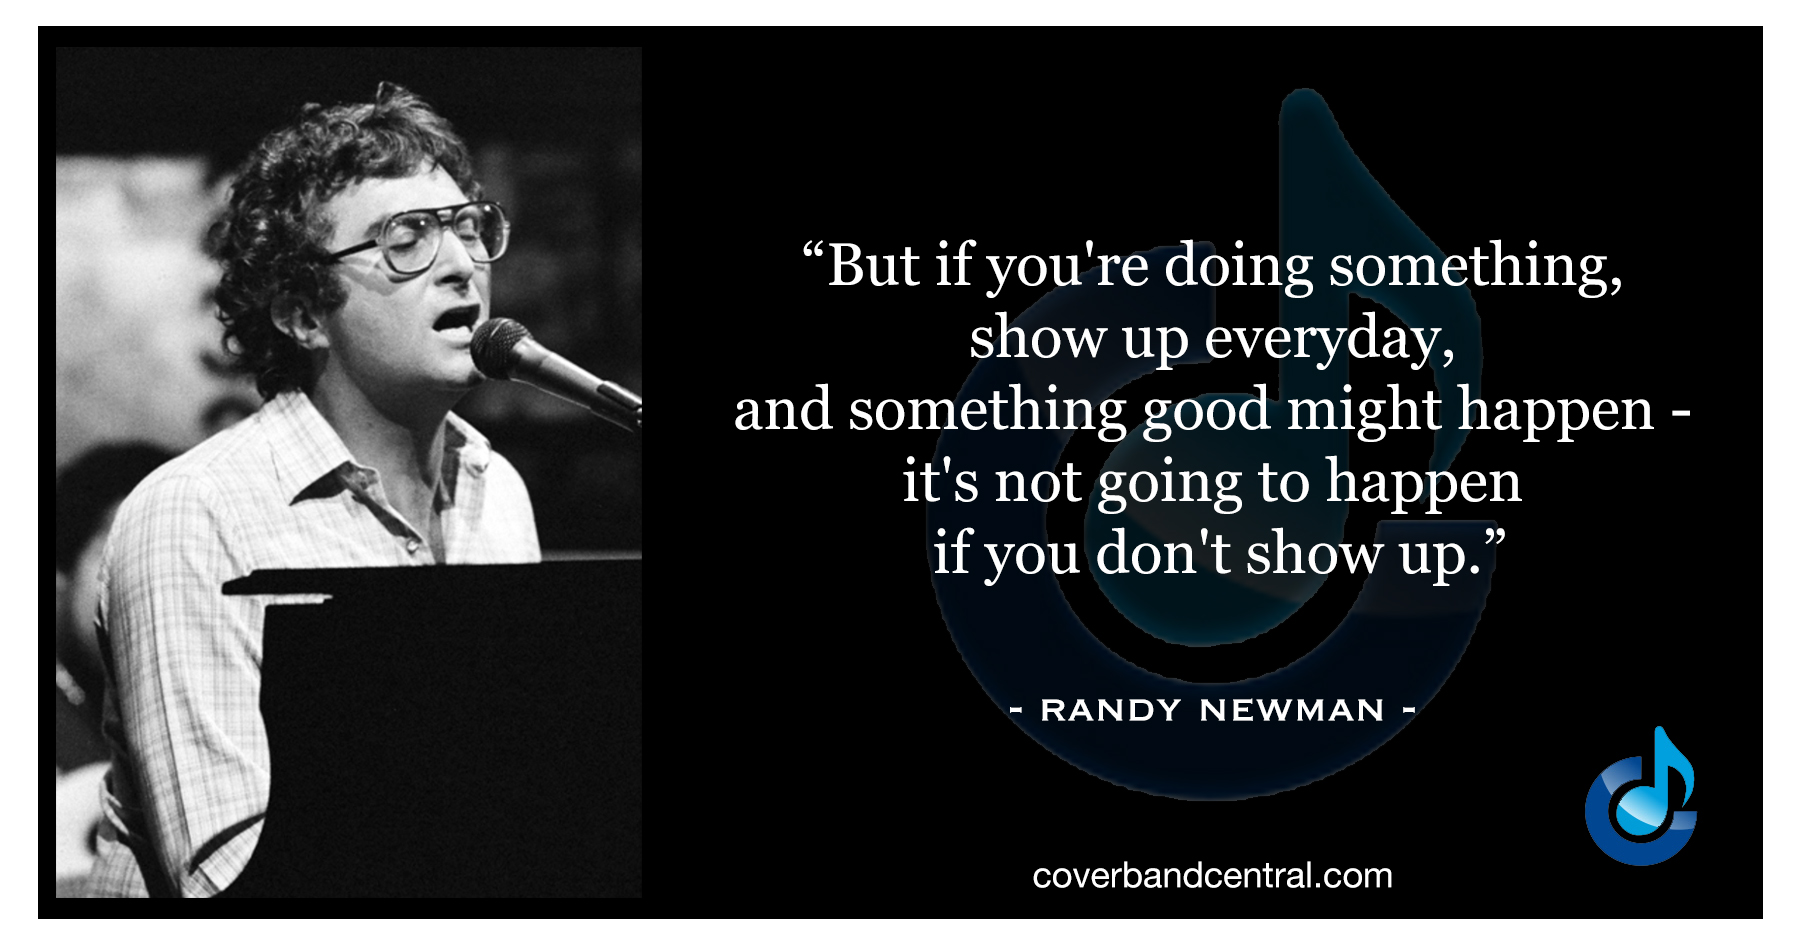 Randy Newman quote